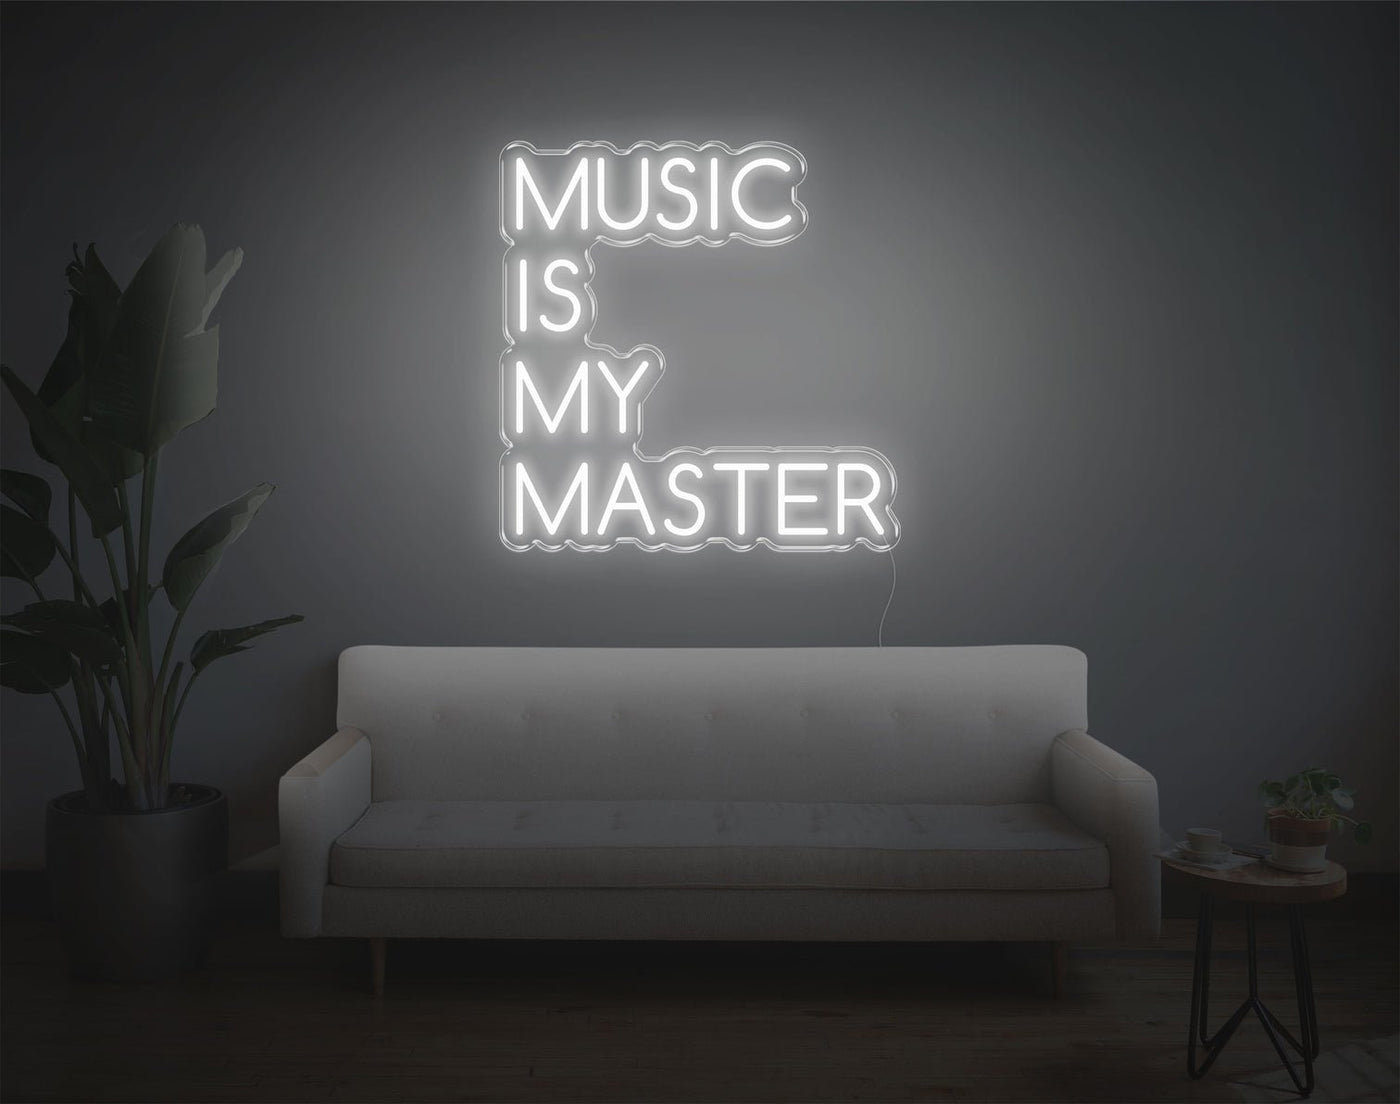 Music Is My Master LED Neon Sign - 20inch x 19inchHot Pink